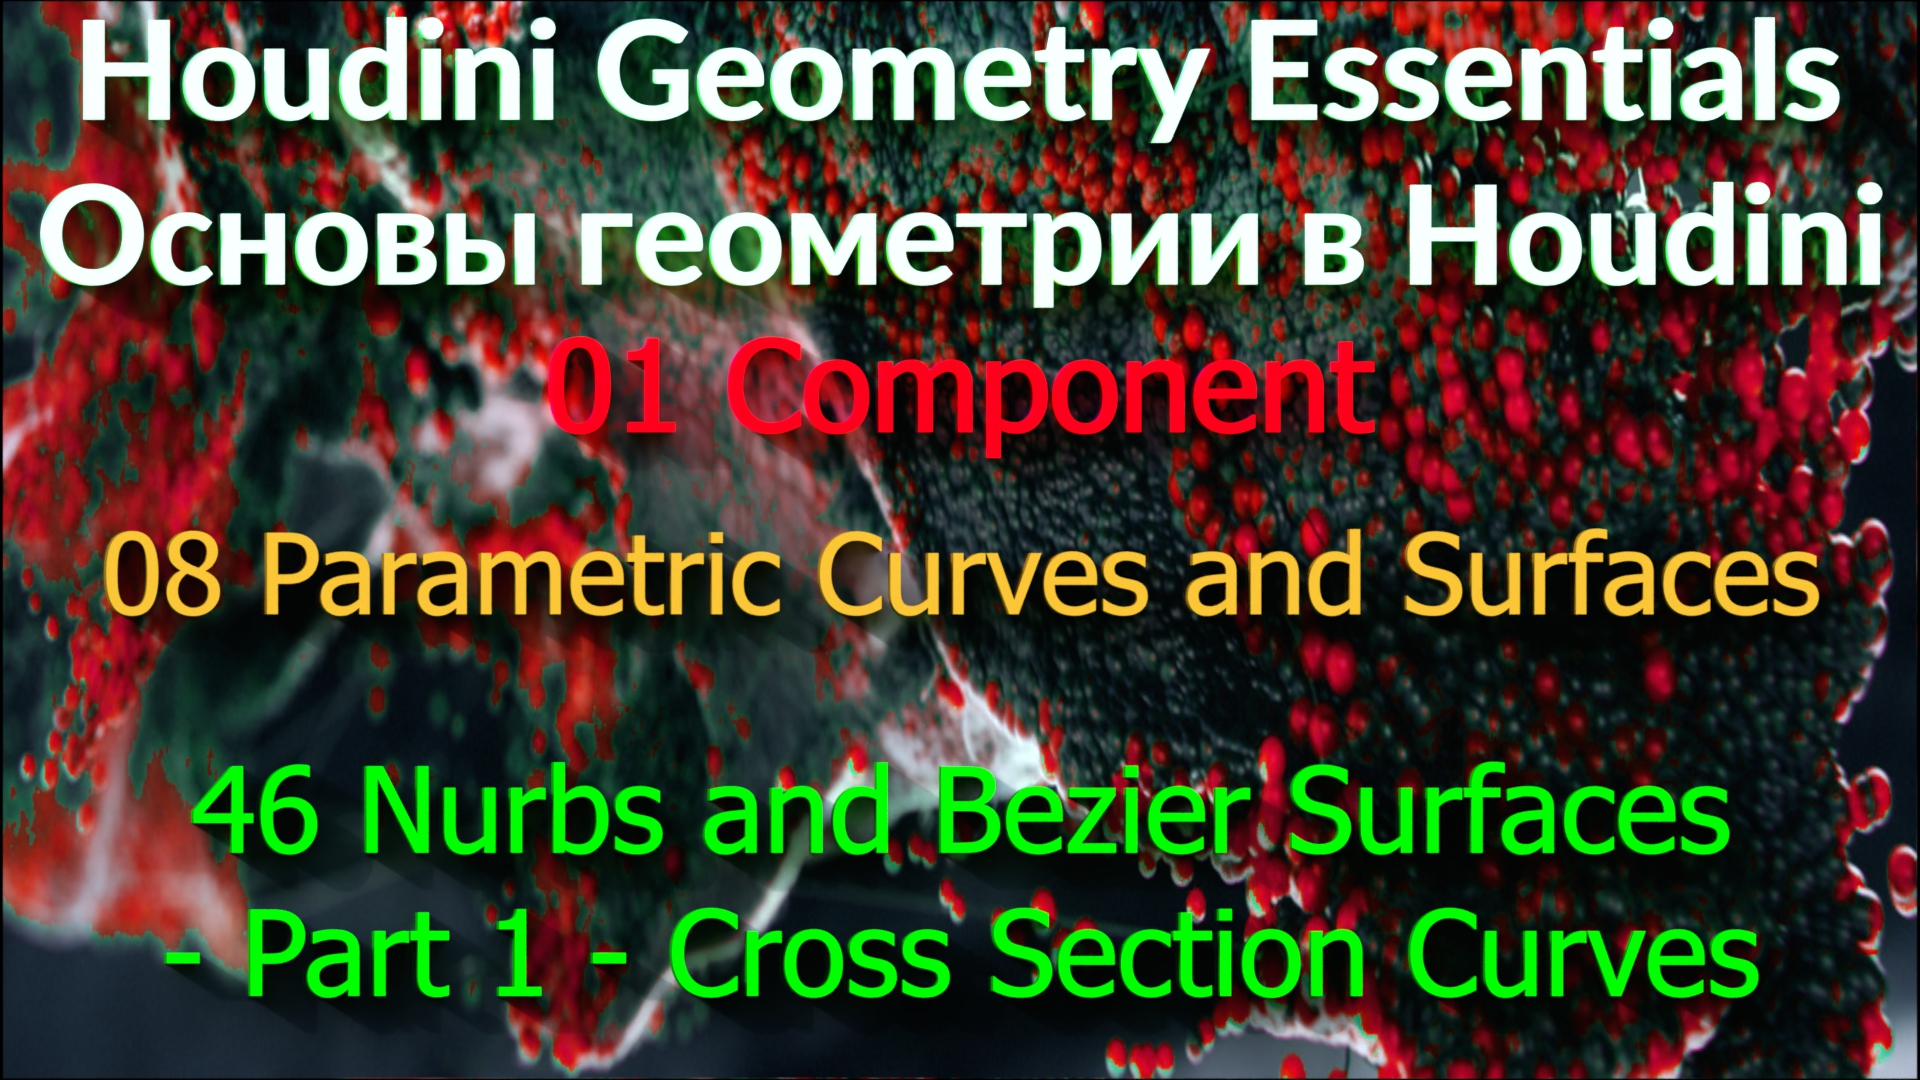 01_08_46. Nurbs and Bezier Surfaces - Part 1 - Cross Section Curves